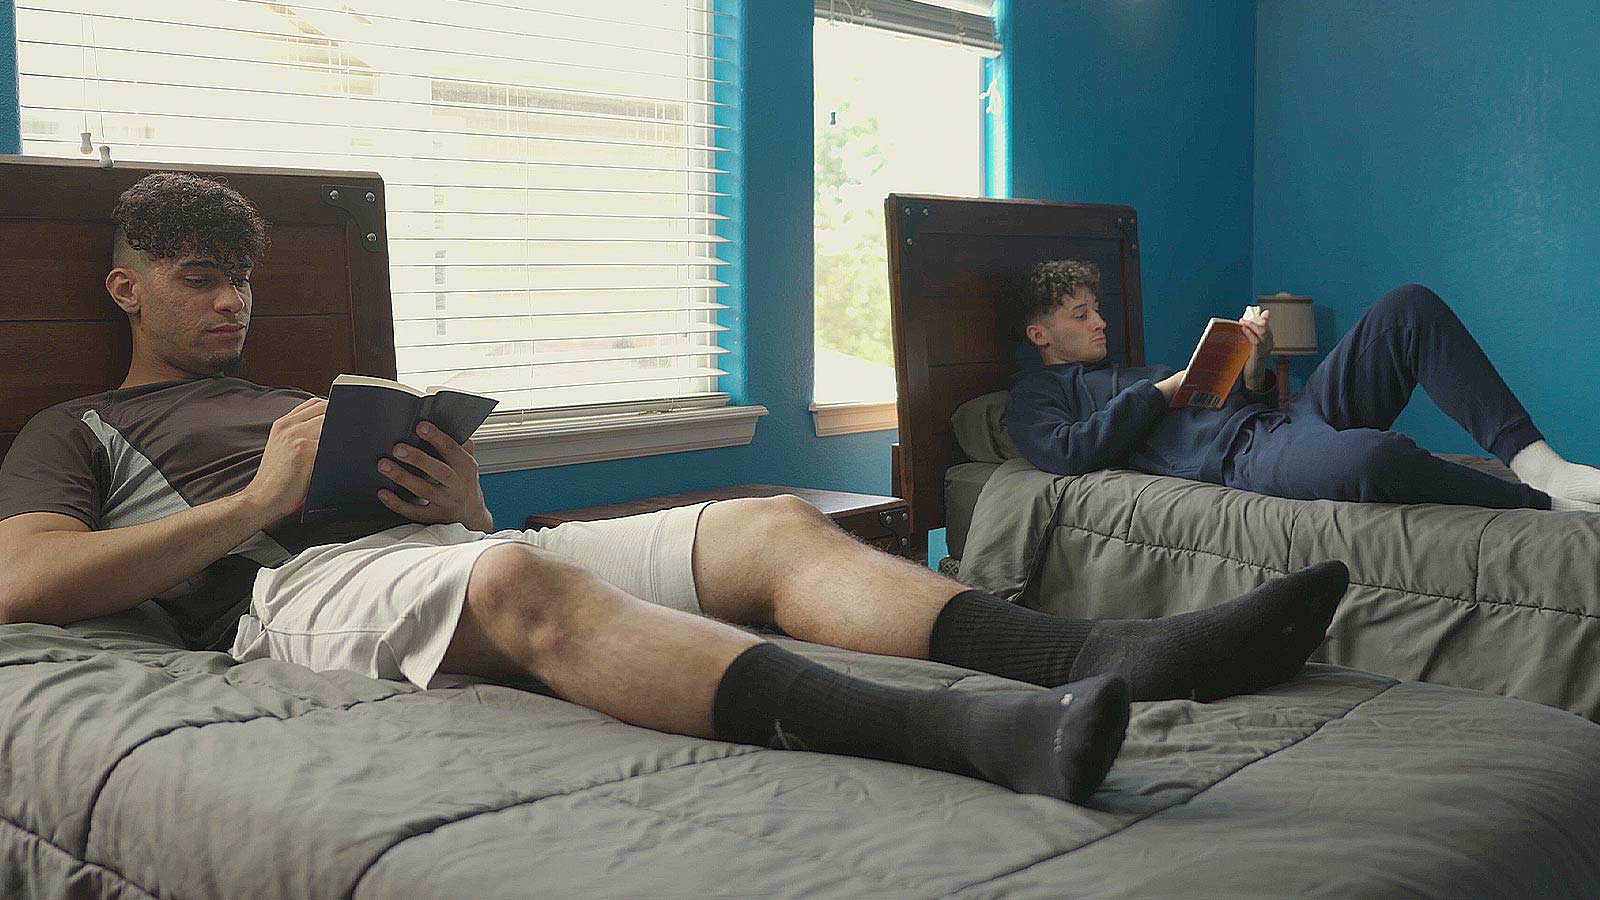 Two men reading books while relaxing on beds.